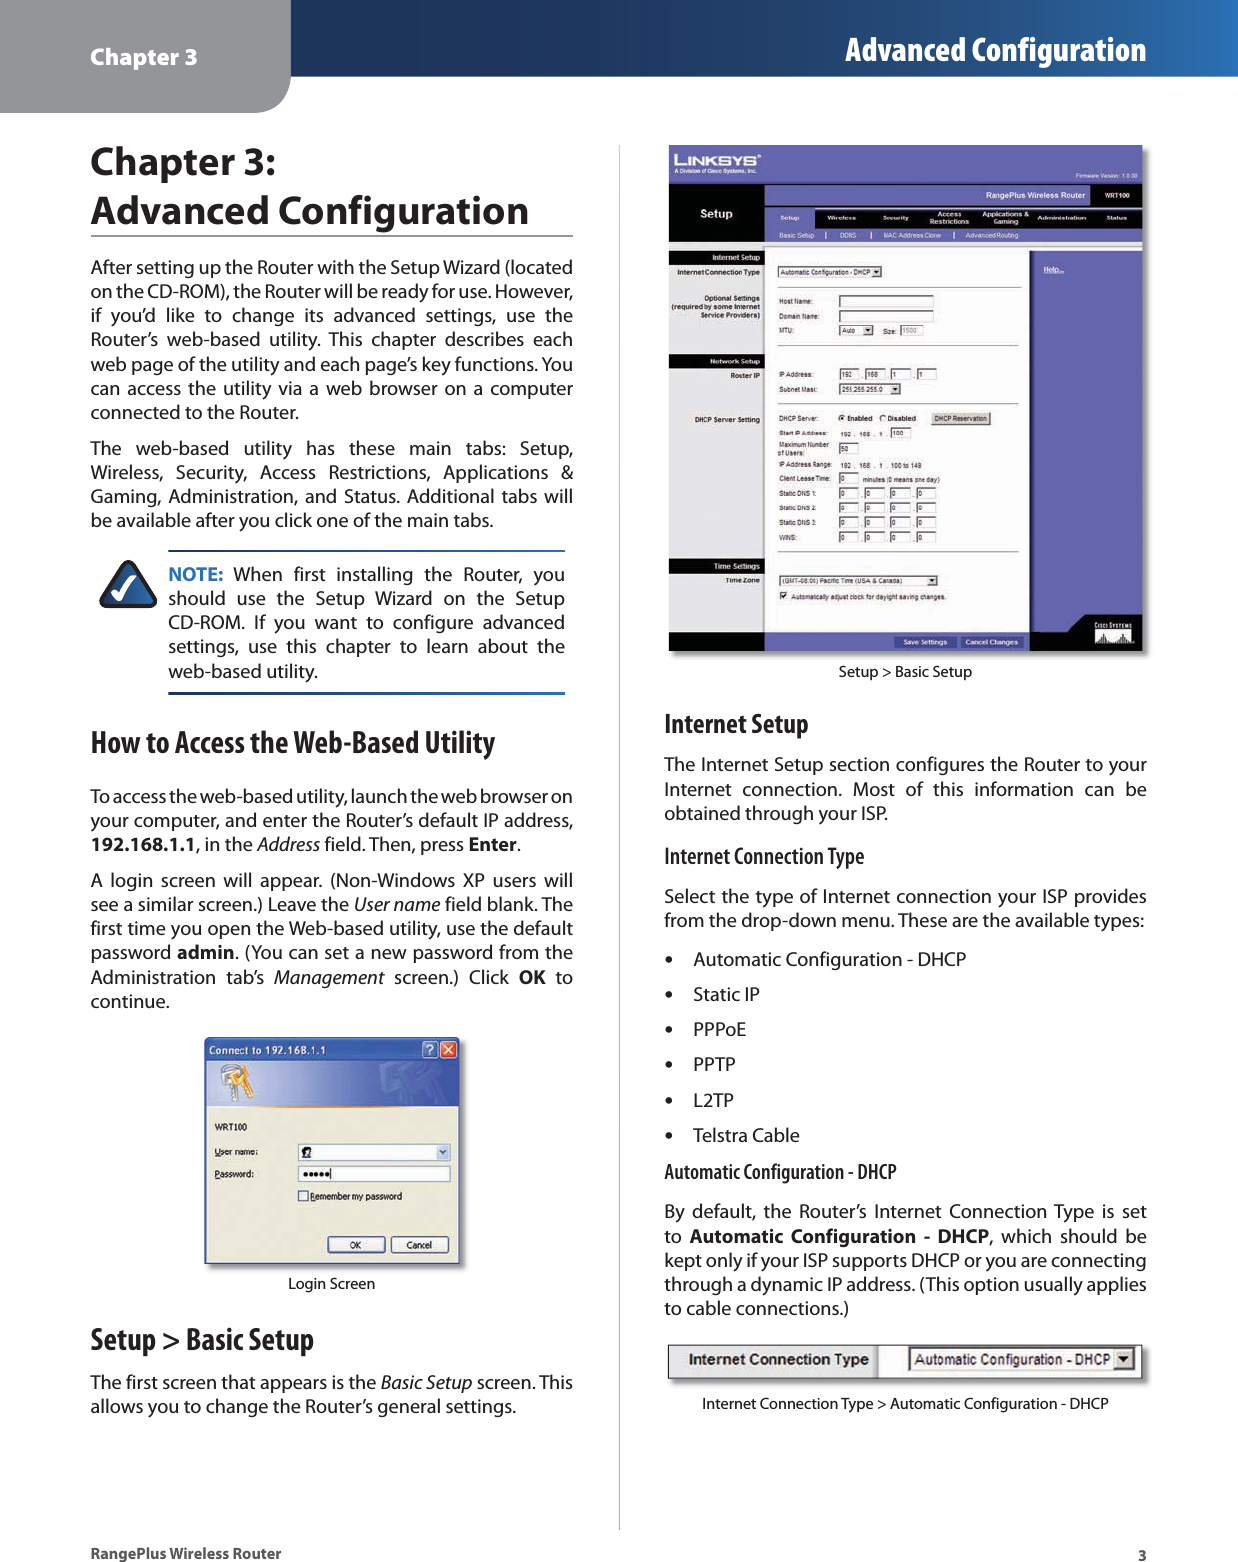 Chapter 3 Advanced Configuration3RangePlus Wireless RouterChapter 3: Advanced ConfigurationAfter setting up the Router with the Setup Wizard (located on the CD-ROM), the Router will be ready for use. However, if you’d like to change its advanced settings, use the Router’s web-based utility. This chapter describes each web page of the utility and each page’s key functions. You can access the utility via a web browser on a computer connected to the Router.The web-based utility has these main tabs: Setup, Wireless, Security, Access Restrictions, Applications &amp; Gaming, Administration, and Status. Additional tabs will be available after you click one of the main tabs.NOTE: When first installing the Router, you should use the Setup Wizard on the Setup CD-ROM. If you want to configure advanced settings, use this chapter to learn about the web-based utility.How to Access the Web-Based UtilityTo access the web-based utility, launch the web browser on your computer, and enter the Router’s default IP address, 192.168.1.1, in the Address field. Then, press Enter.A login screen will appear. (Non-Windows XP users will see a similar screen.) Leave the User name field blank. The first time you open the Web-based utility, use the default password admin. (You can set a new password from the Administration tab’s Management screen.) Click OK to continue.Login ScreenSetup &gt; Basic SetupThe first screen that appears is the Basic Setup screen. This allows you to change the Router’s general settings. Setup &gt; Basic SetupInternet SetupThe Internet Setup section configures the Router to your Internet connection. Most of this information can be obtained through your ISP.Internet Connection TypeSelect the type of Internet connection your ISP provides from the drop-down menu. These are the available types:Automatic Configuration - DHCPStatic IPPPPoEPPTPL2TPTelstra CableAutomatic Configuration - DHCPBy default, the Router’s Internet Connection Type is set to  Automatic Configuration - DHCP, which should be kept only if your ISP supports DHCP or you are connecting through a dynamic IP address. (This option usually applies to cable connections.)Internet Connection Type &gt; Automatic Configuration - DHCP••••••